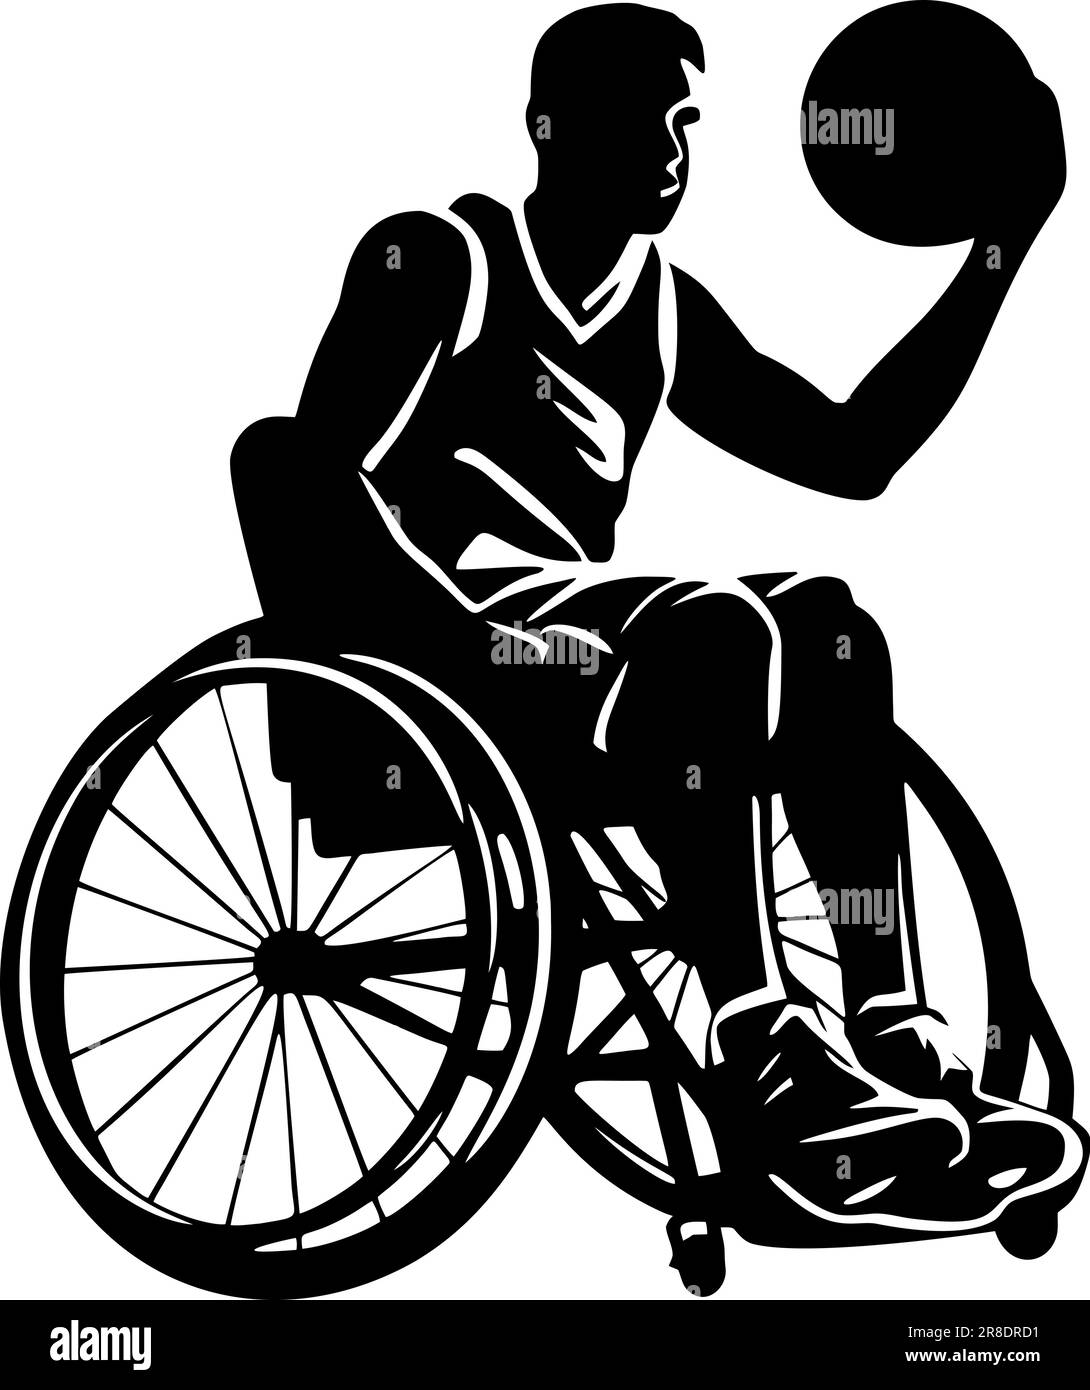 wheelchair basketball player icon in black over white Stock Vector